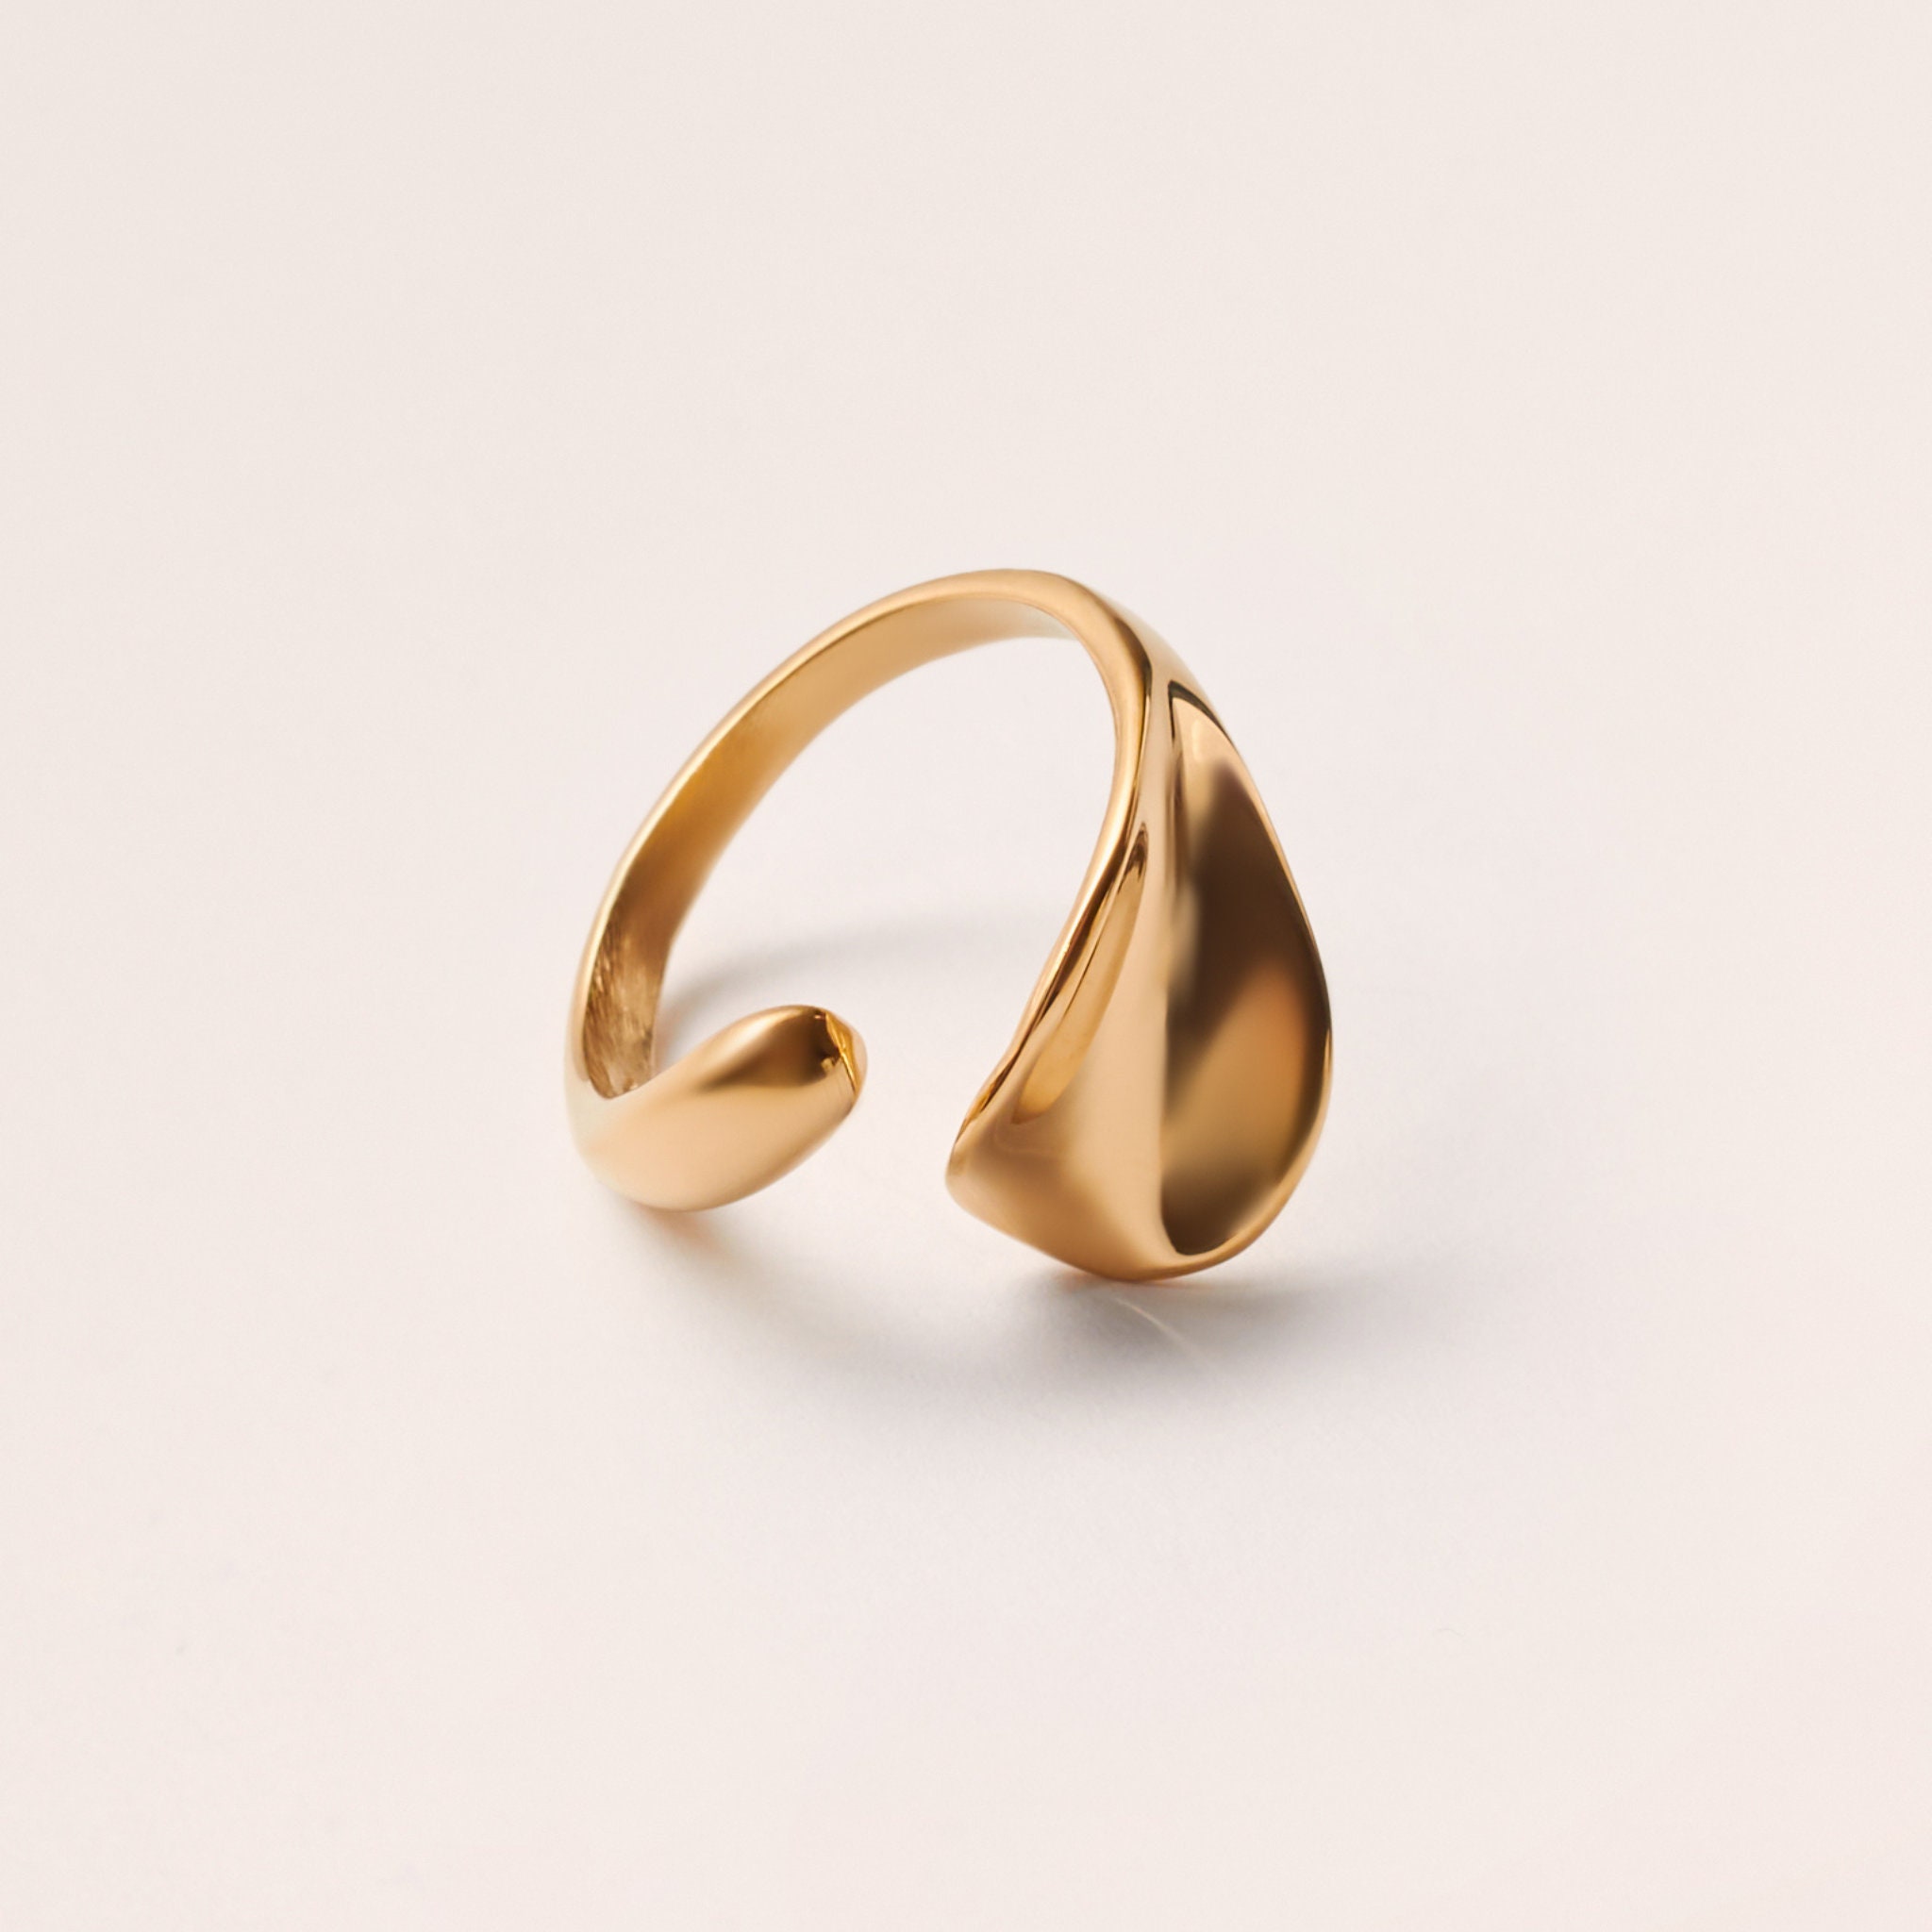 Waterproof Sculptured Open Ring - 18K Gold Plated Stainless Steel Statement Adjustable Chunky Everyday